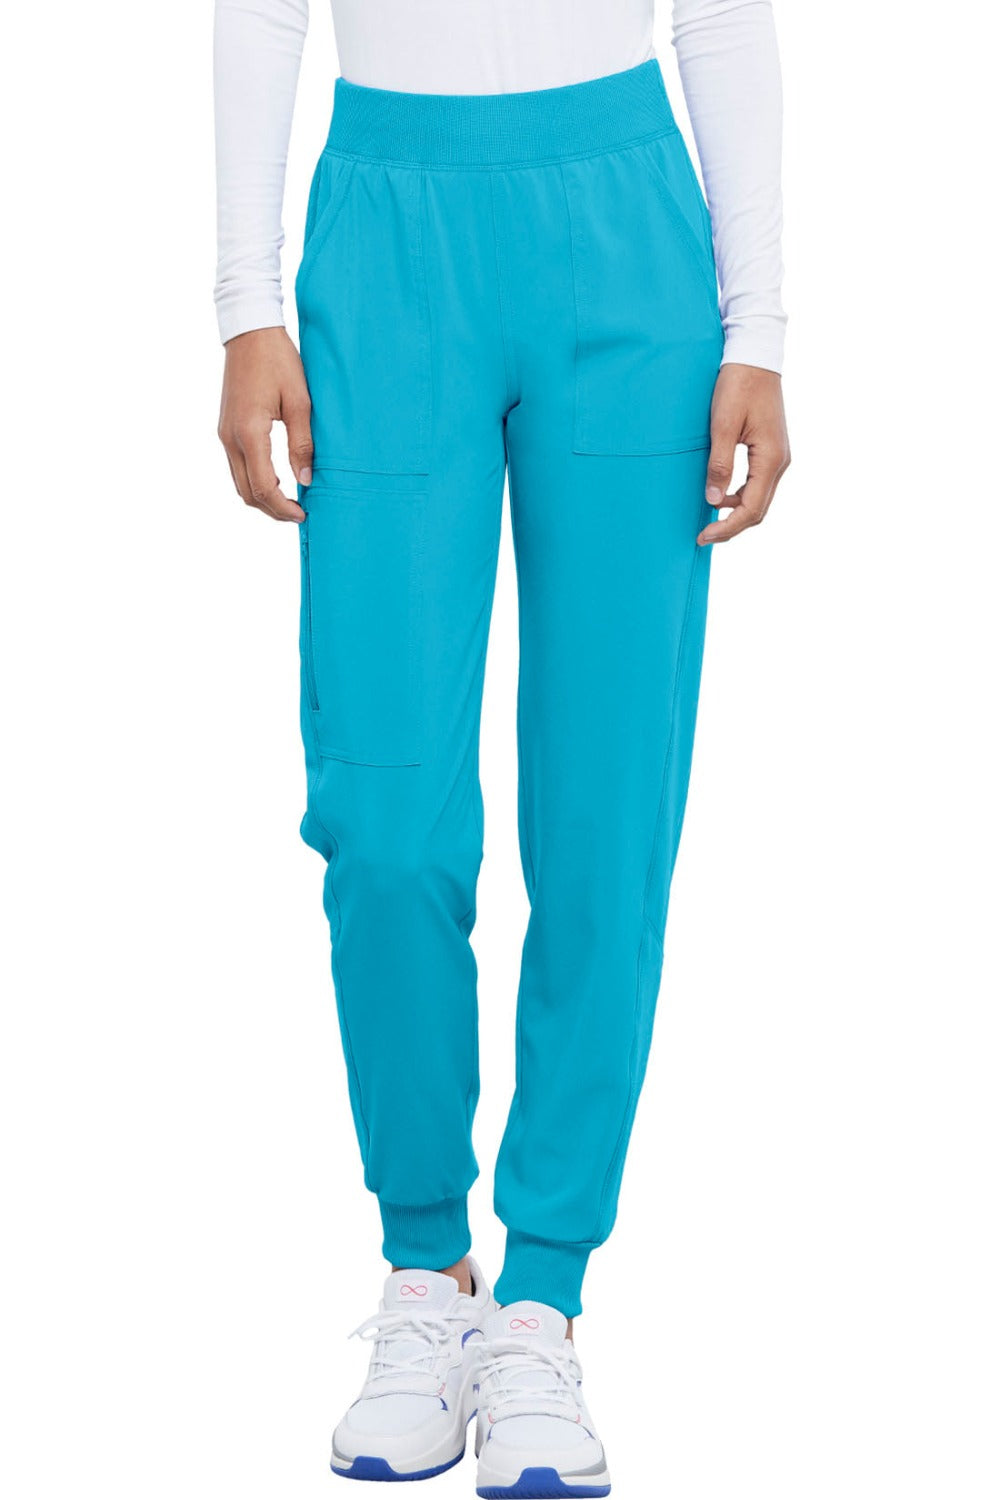 Cherokee Allura Scrub Pant Pull On Jogger in Teal Blue at Parker's Clothing and Shoes.